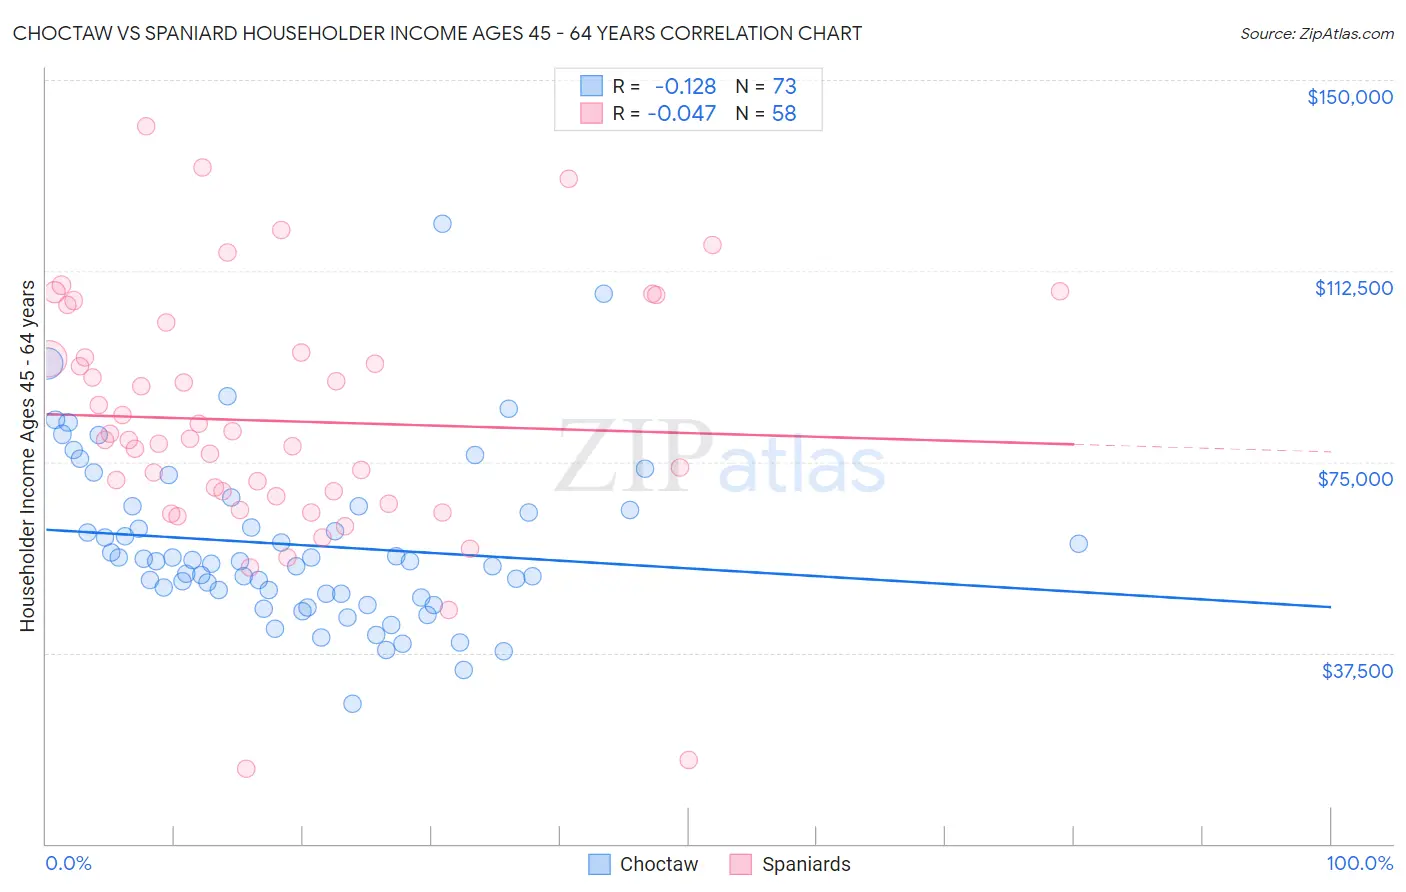 Choctaw vs Spaniard Householder Income Ages 45 - 64 years